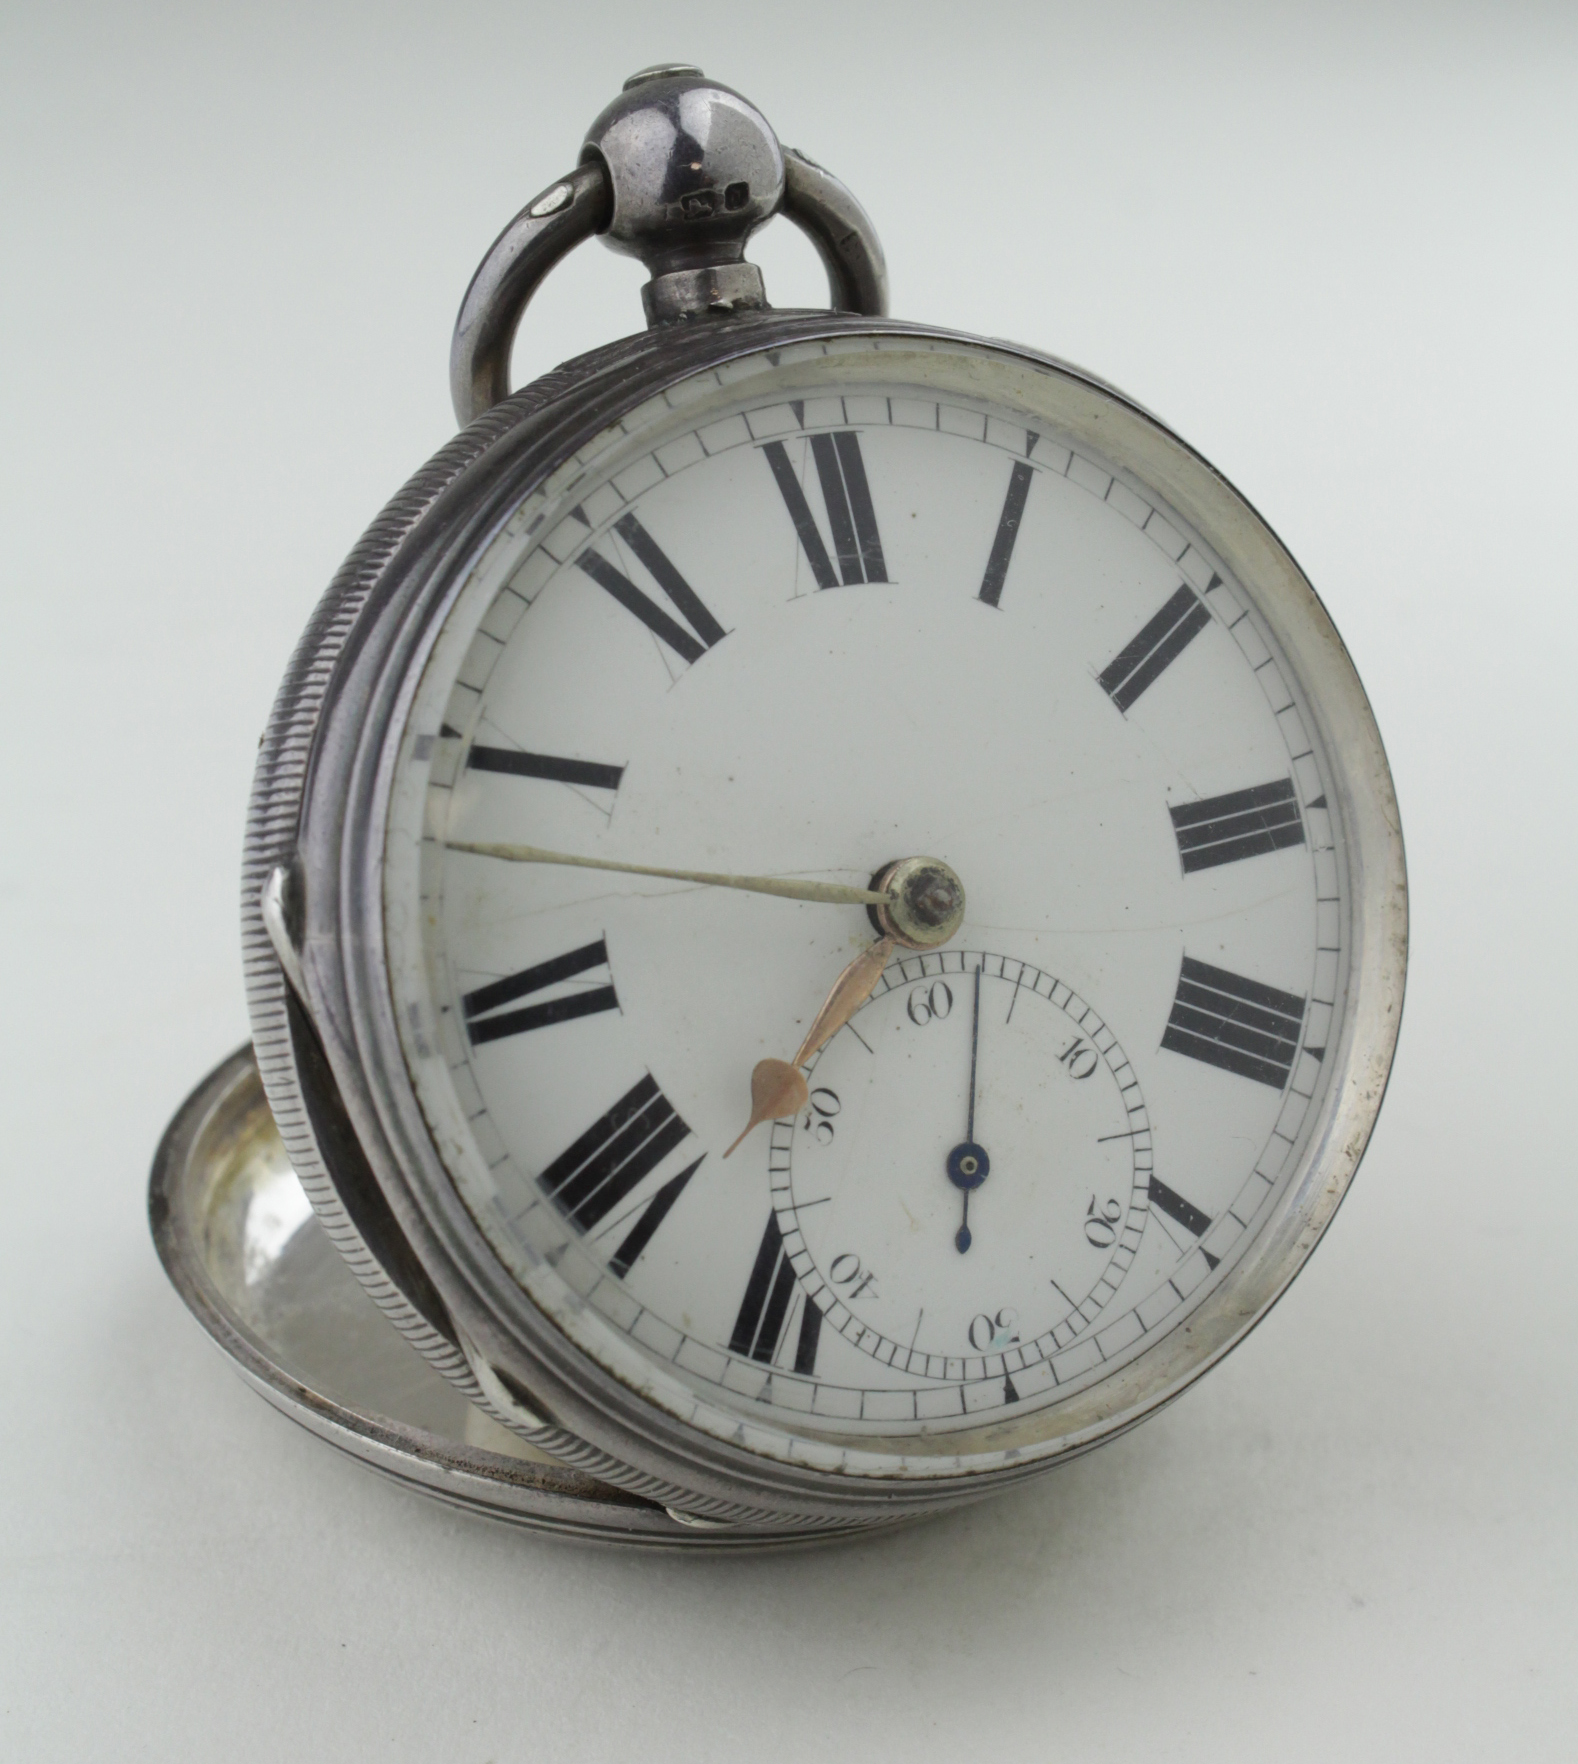 Gents Silver cased open face pocket watch. Hallmarked London 1883. The white dial with black roman